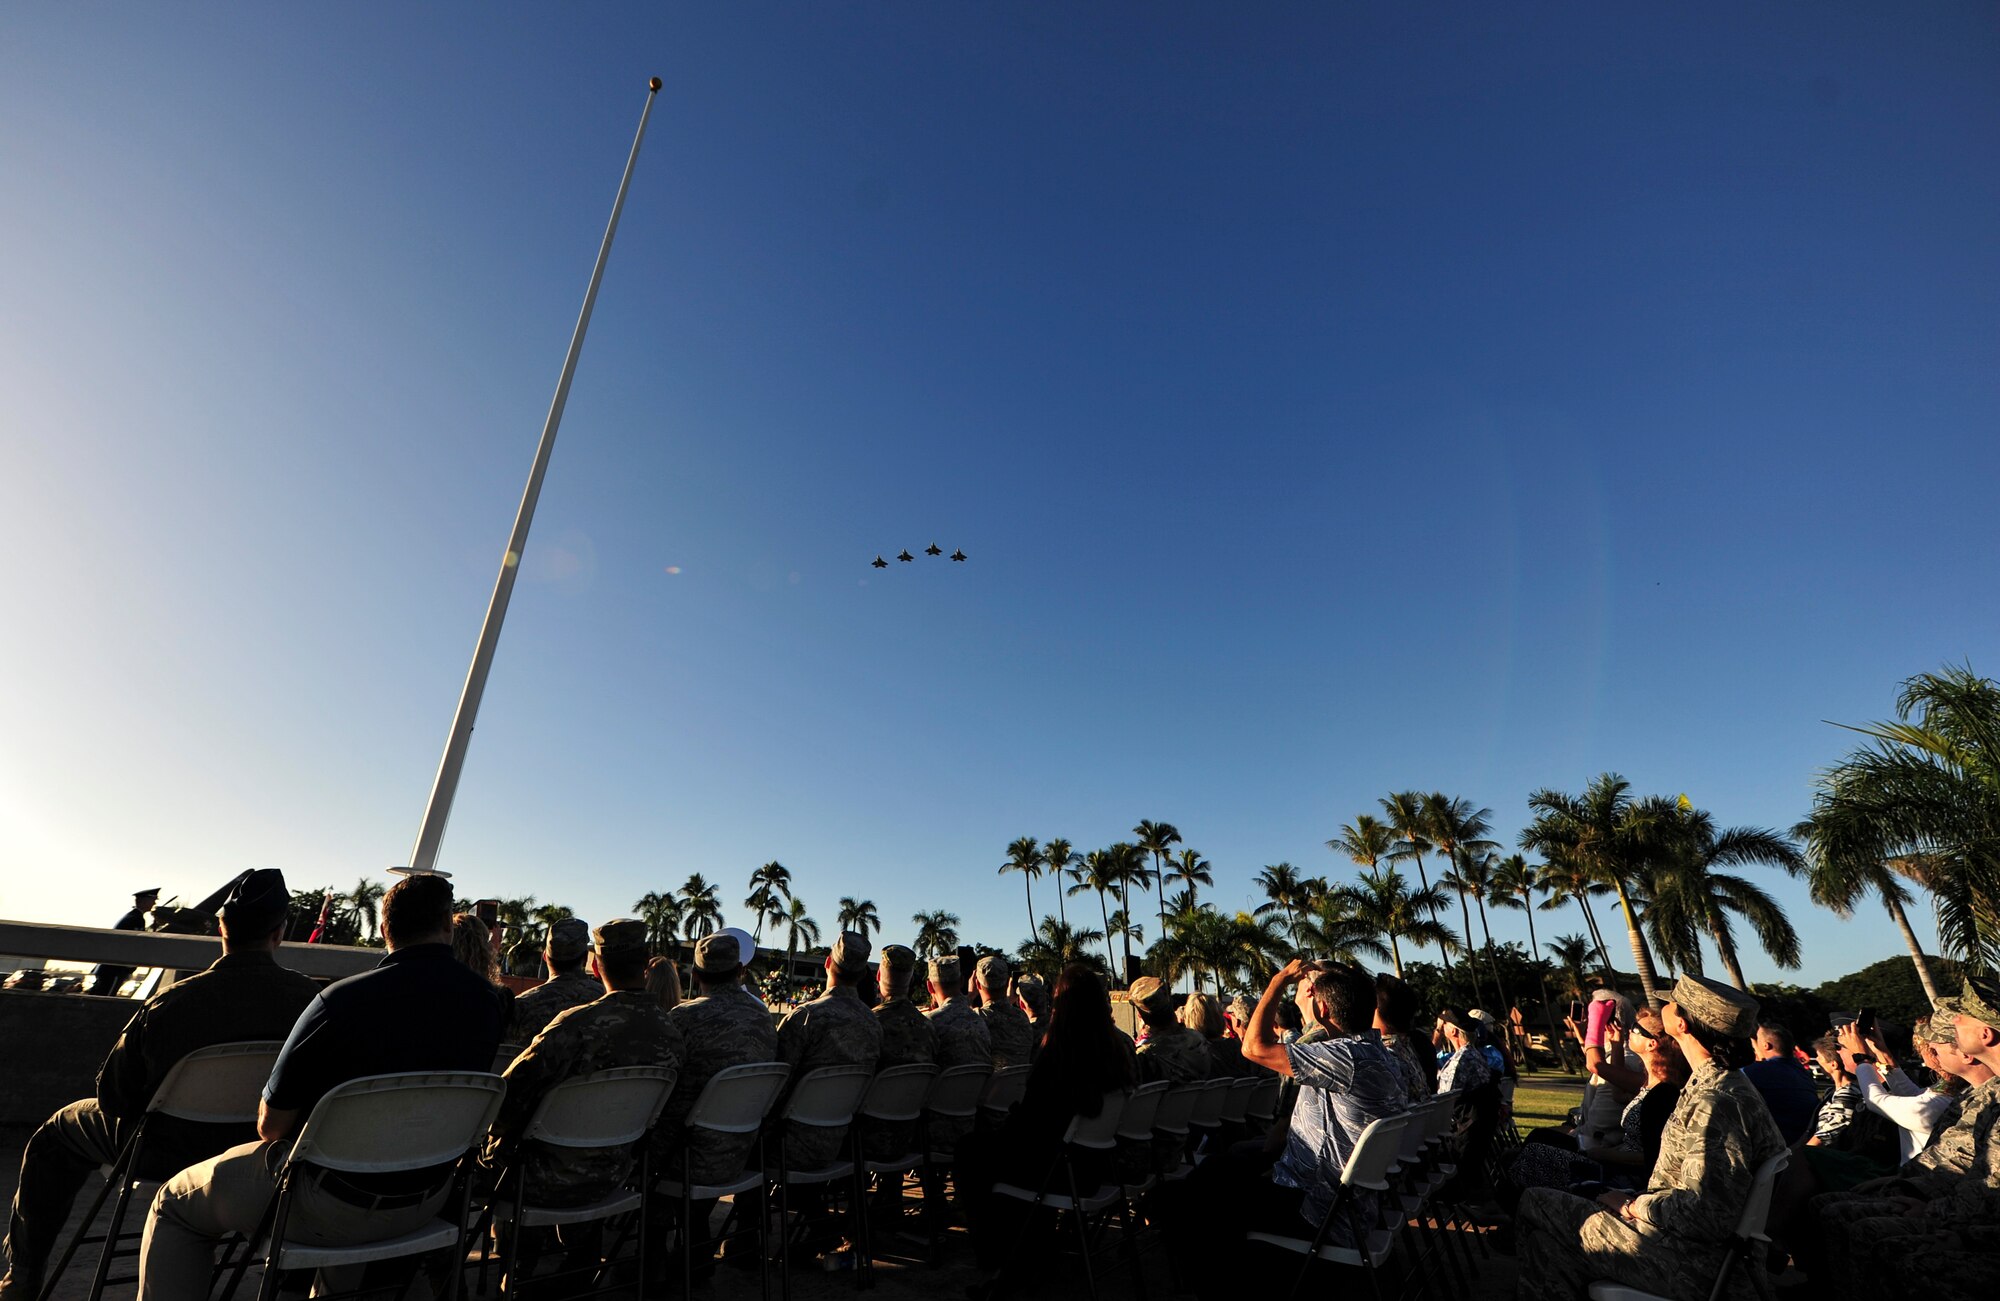 Spectators watch the F-22 Raptor missing man formation fly over during the 15th Wing’s Remembrance Ceremony, Joint Base Pearl Harbor-Hickam, Hawaii, Dec. 7, 2017. The 15th Wing sponsored the ceremony to remember the 76th anniversary of the attacks that claimed the lives of 189 Army Air Corps Airmen and civilians and injured 303 others. (U.S. Air Force photo by Tech. Sgt. Heather Redman)